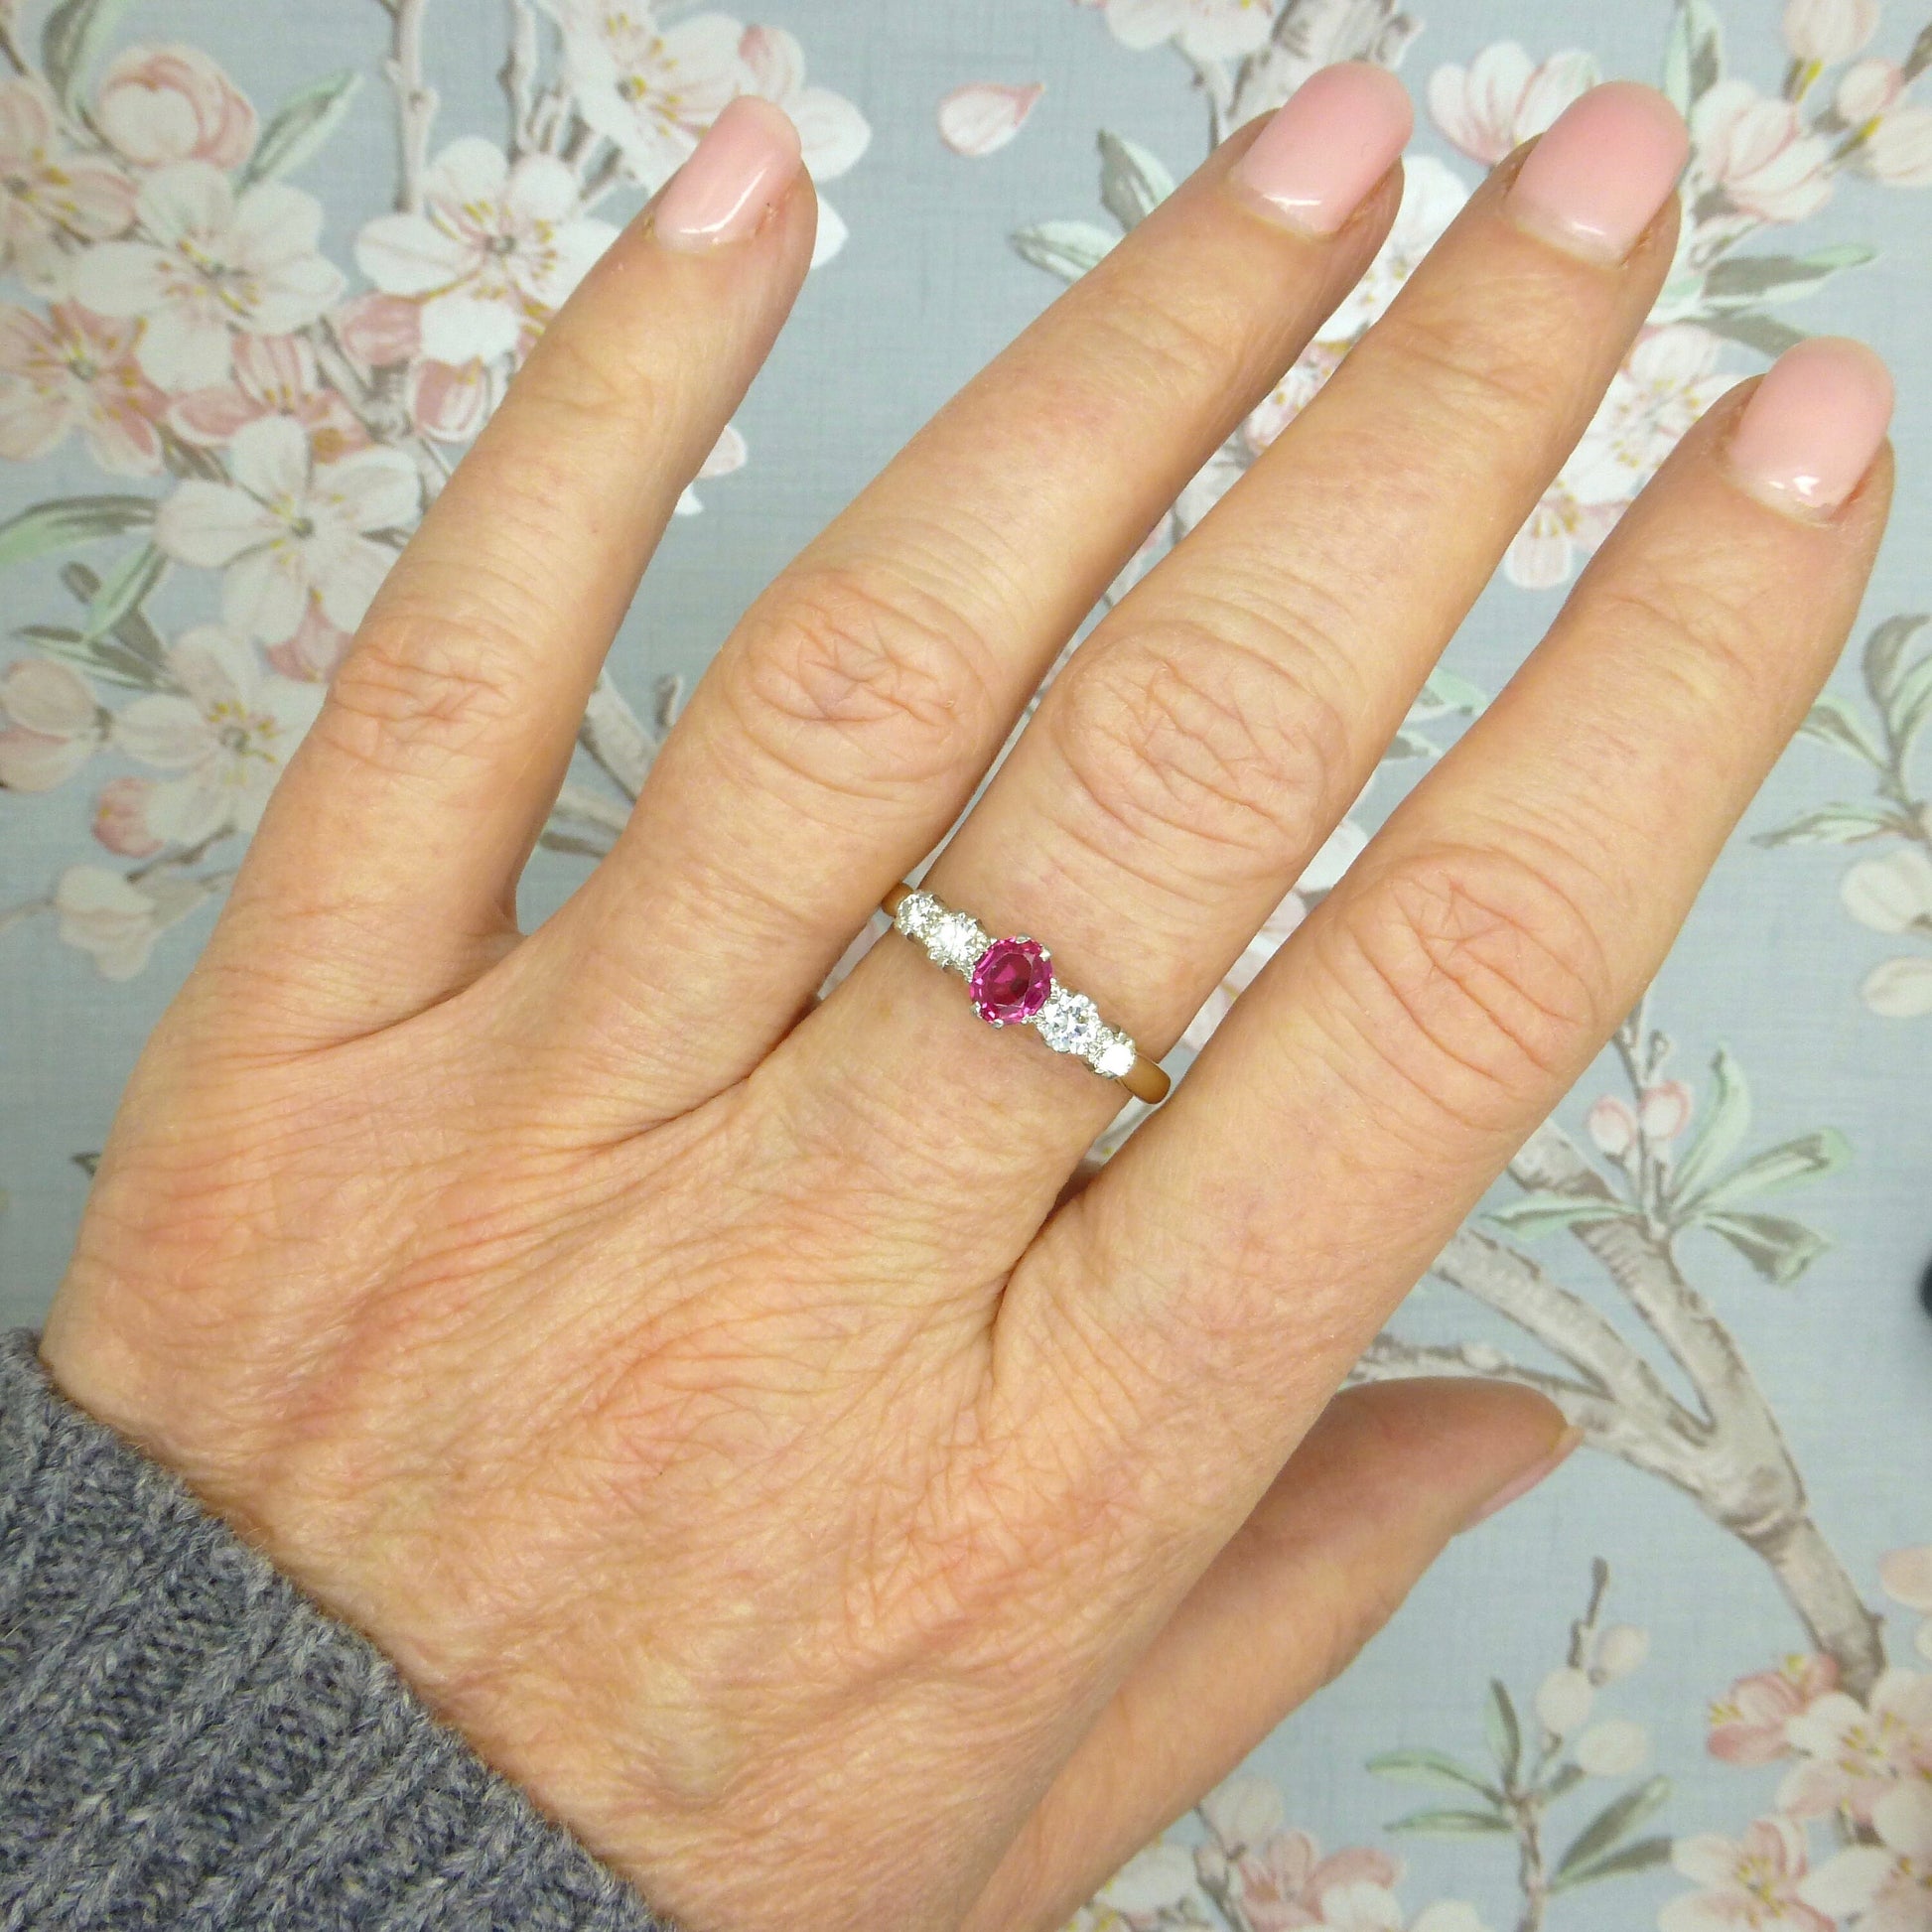 Antique Art Deco 18ct platinum verneuil ruby and diamond five stone ring c1920's